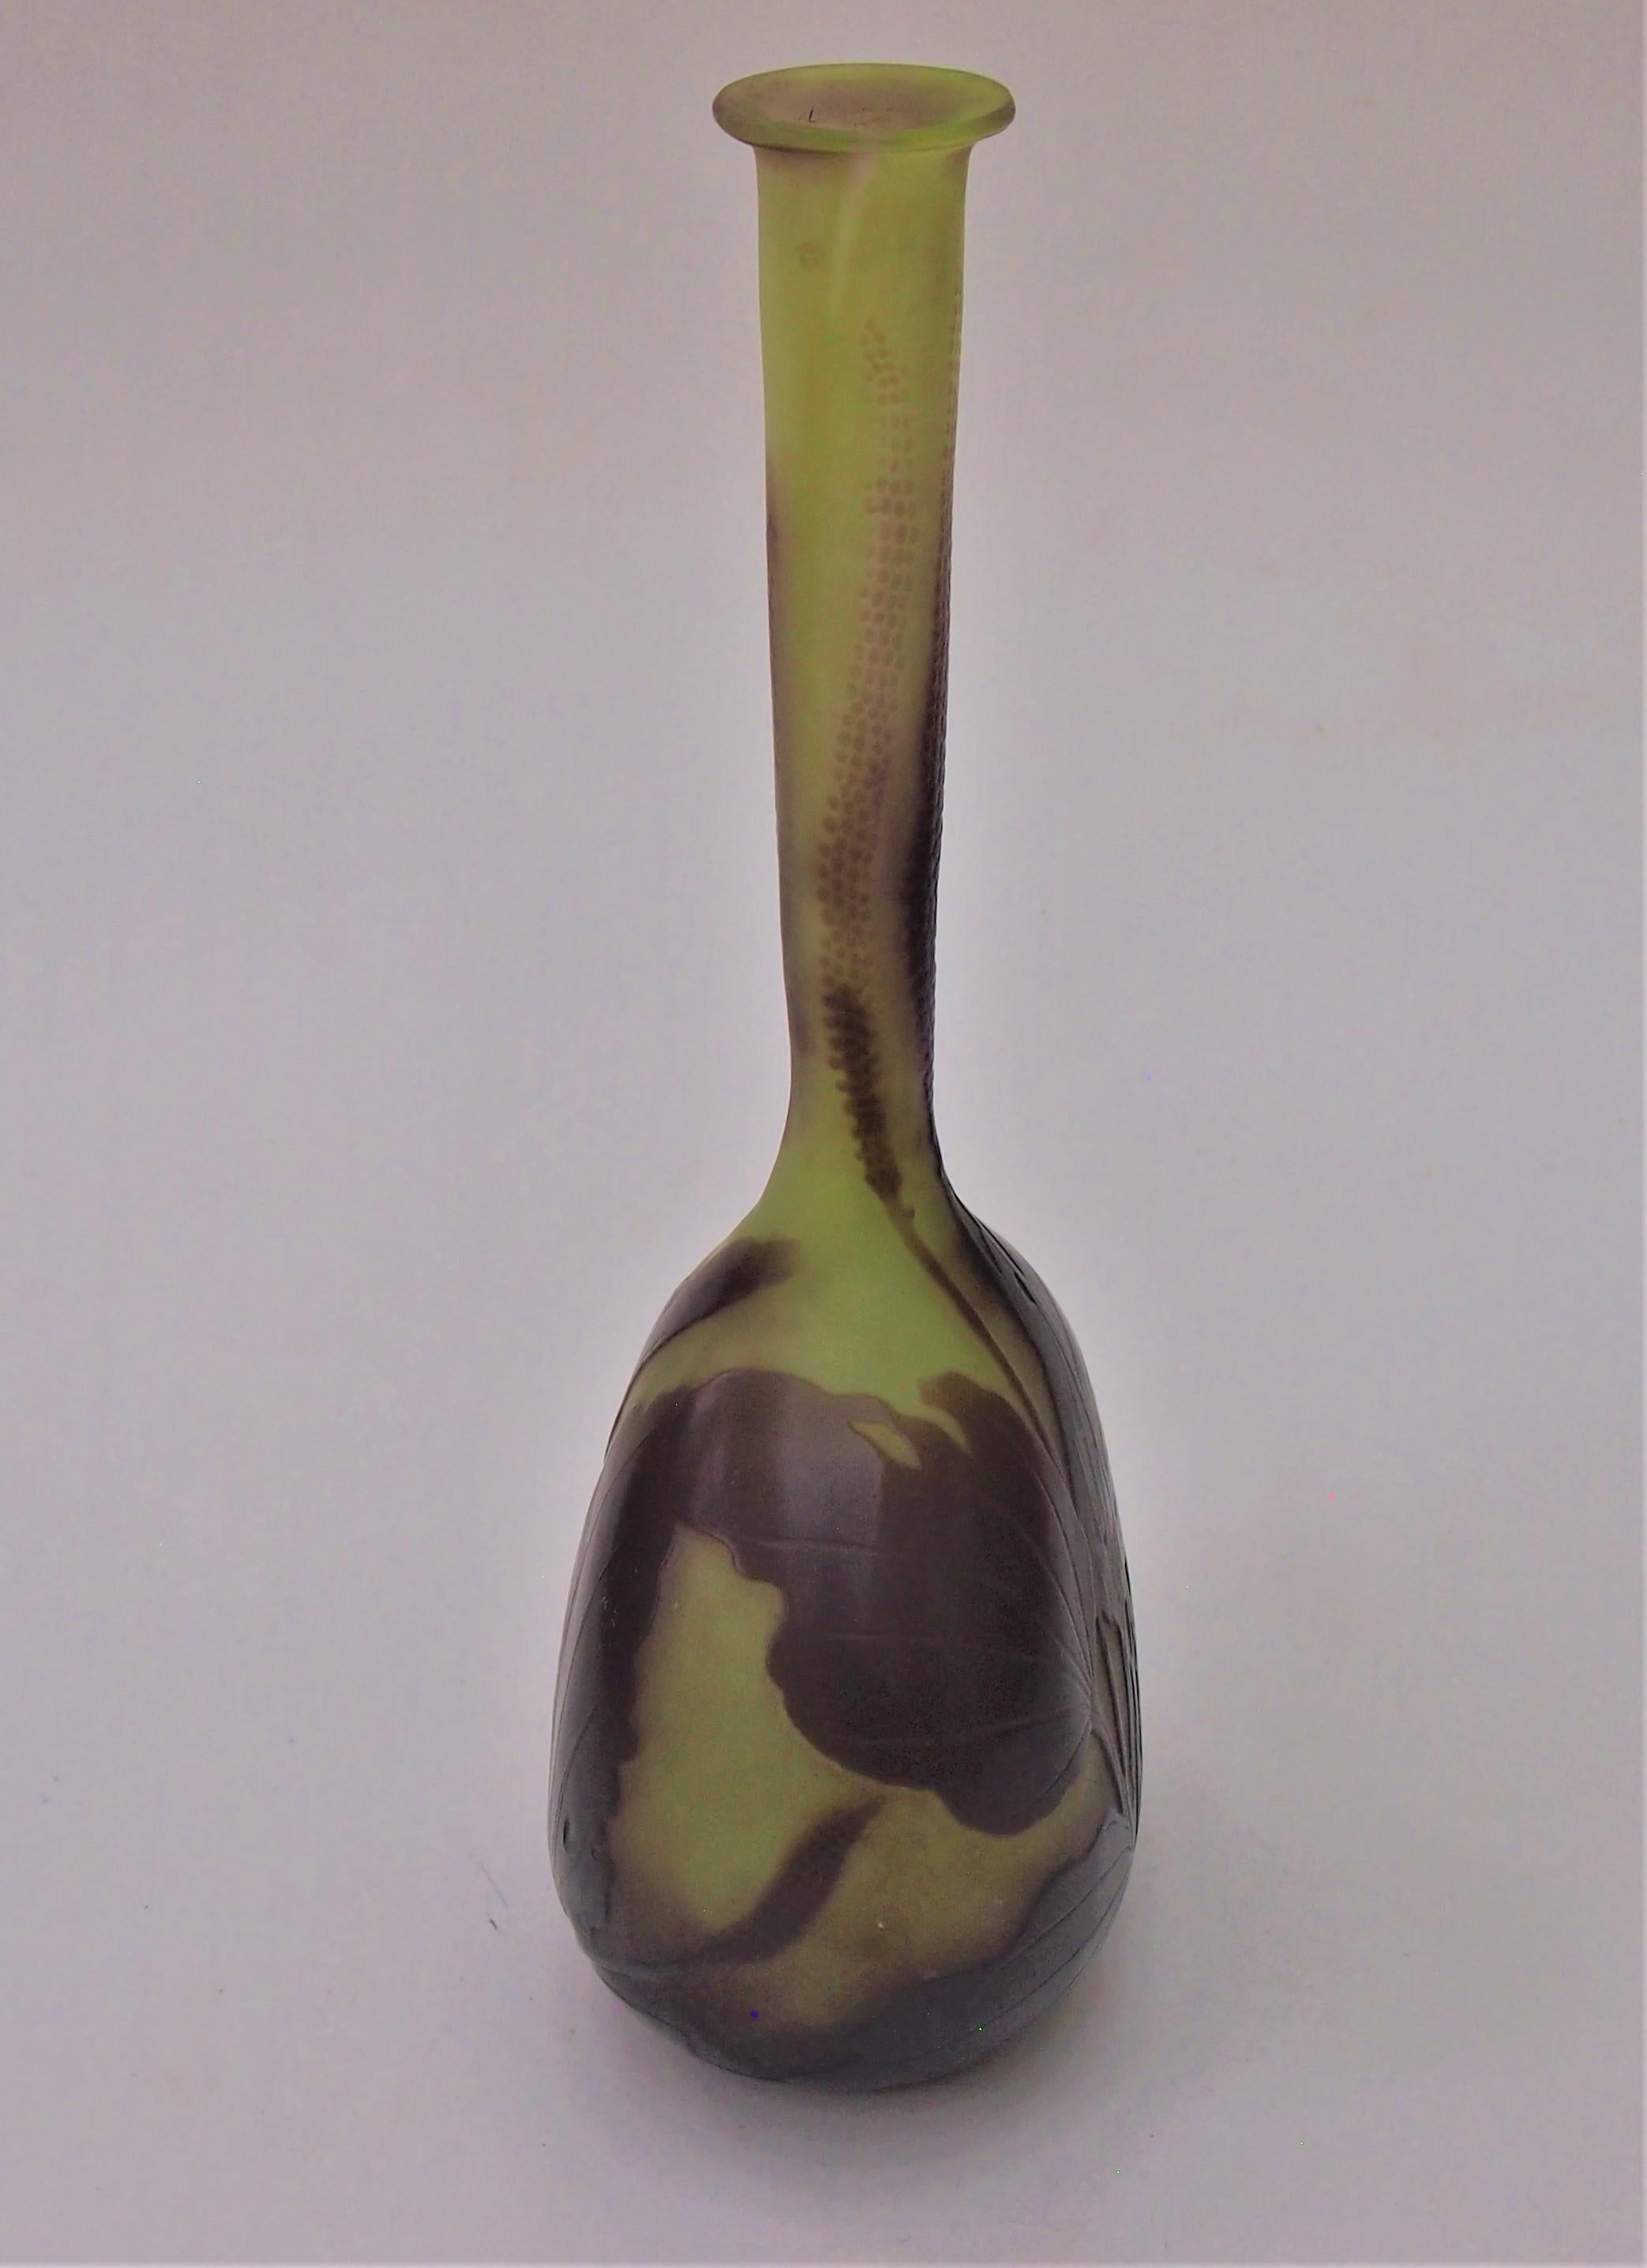 Rare Art Nouveau Emile Galle Extra Large 'Banjo' vase, depicting a sticky fly catcher type plant in purple over green, signed in cameo (see picture 5 Provost Mk III see last picture for dating chart). Emile Galle Cameo Banjo vases (so called because